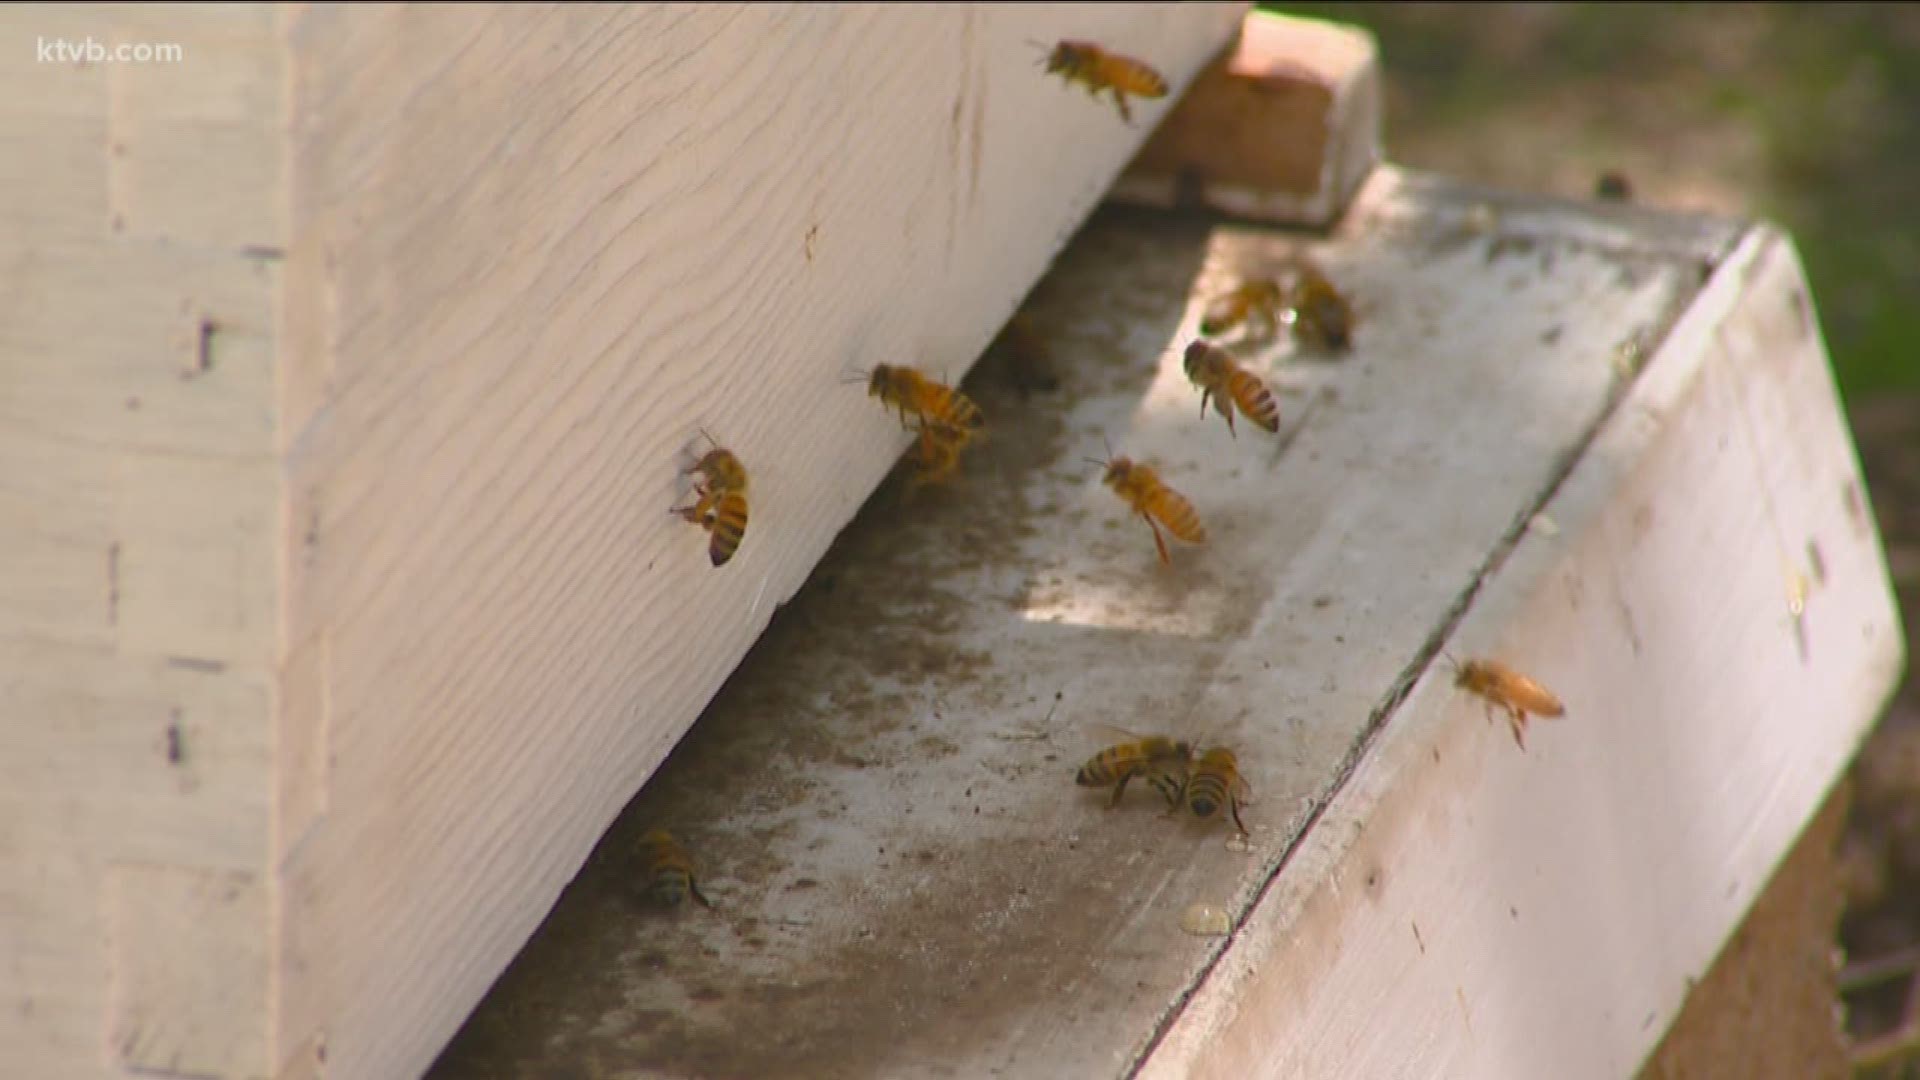 In this first of two parts, Jim Duthie takes a closer look at the life of the little honeybee.